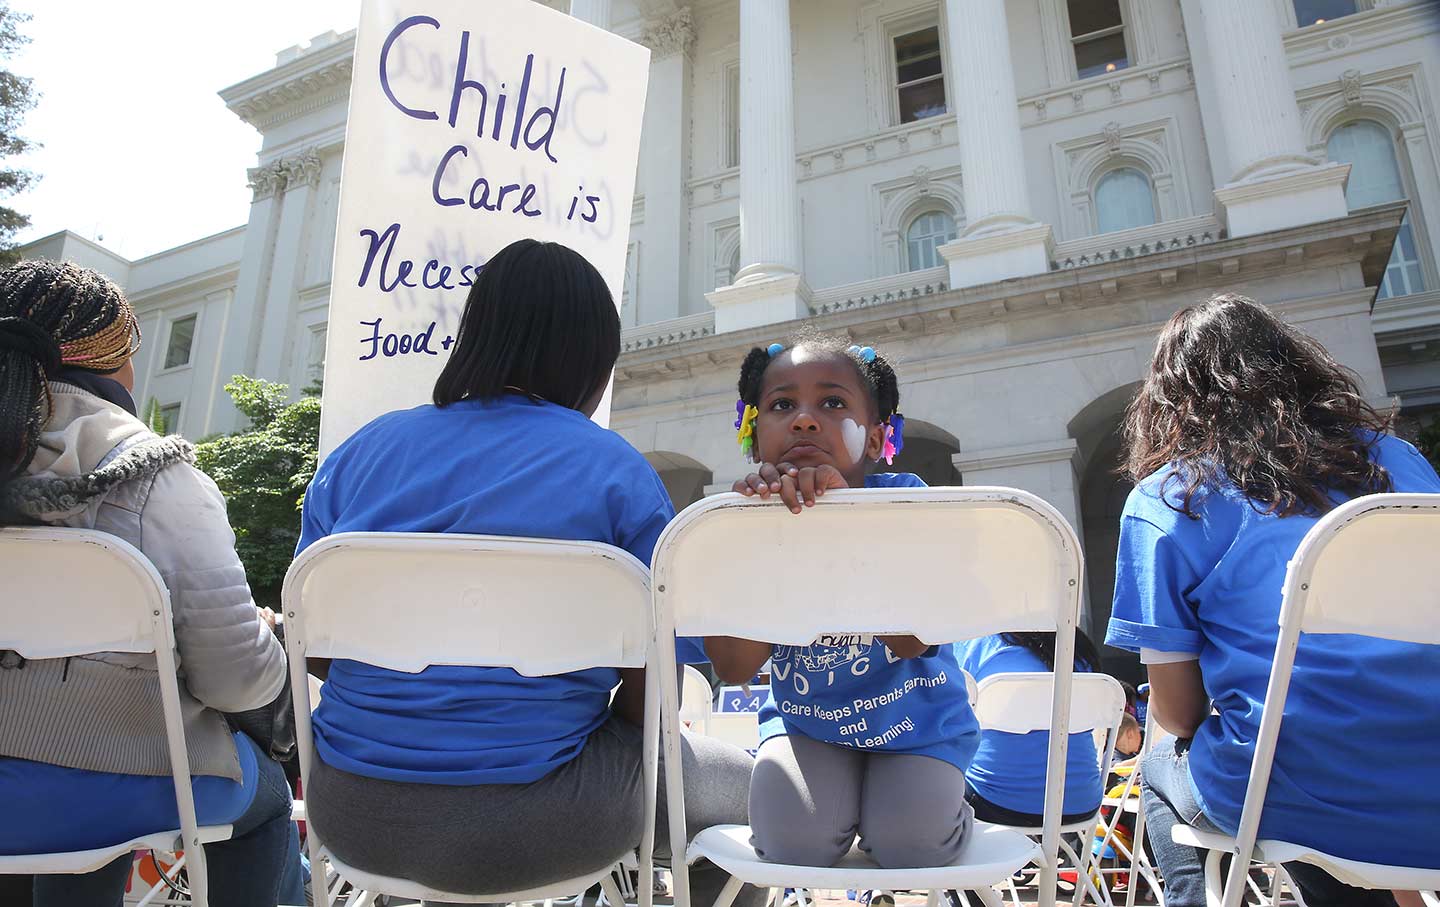 Little girl at child care rally CA